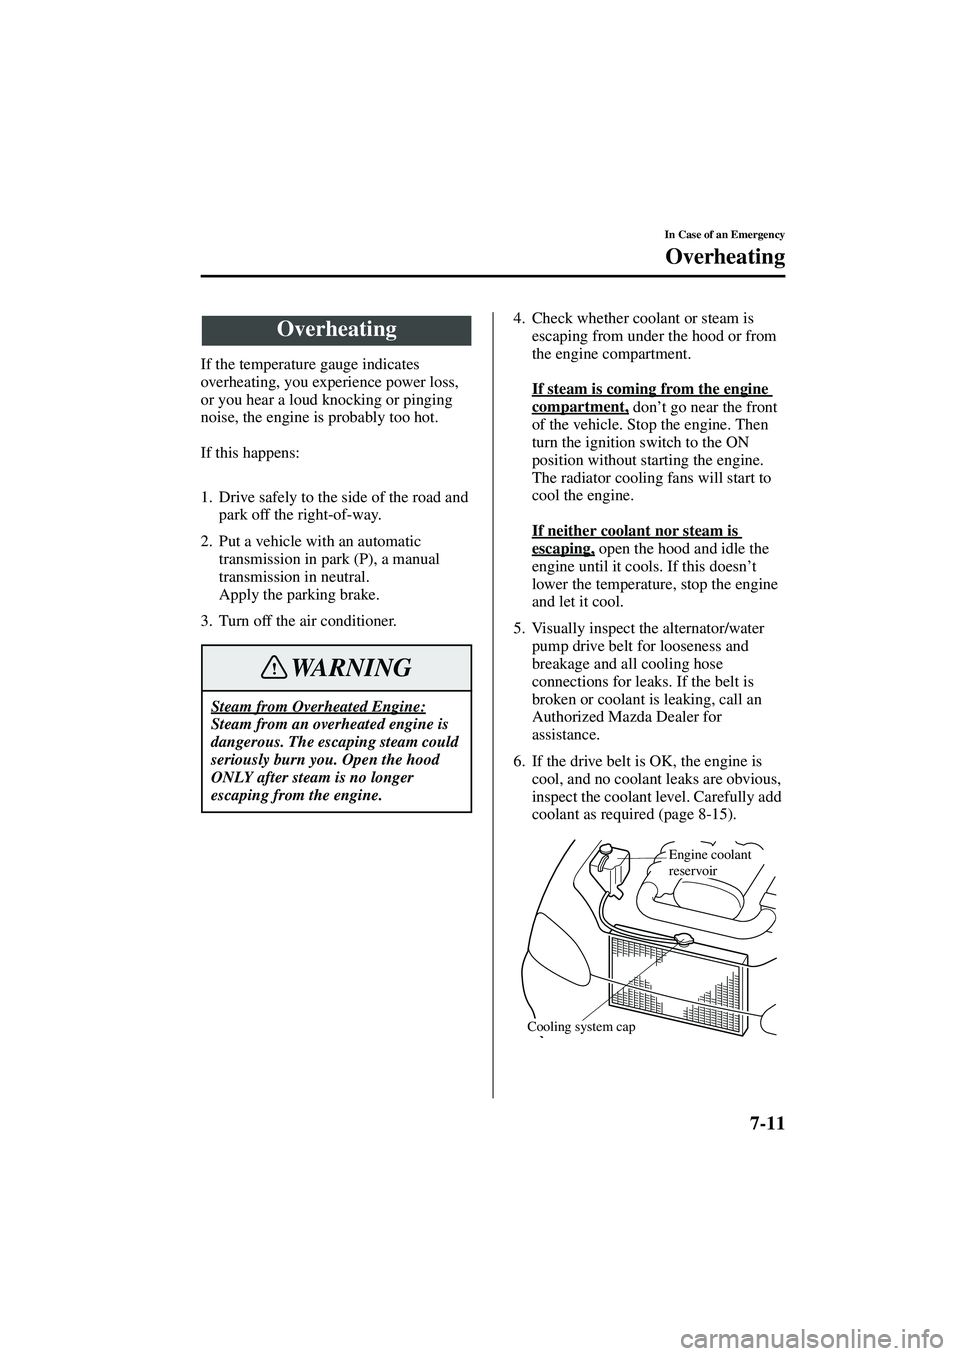 MAZDA MODEL MX-5 MIATA 2002  Owners Manual 7-11
In Case of an Emergency
Form No. 8Q42-EA-01F
Overheating
If the temperature gauge indicates 
overheating, you experience power loss, 
or you hear a loud knocking or pinging 
noise, the engine is 